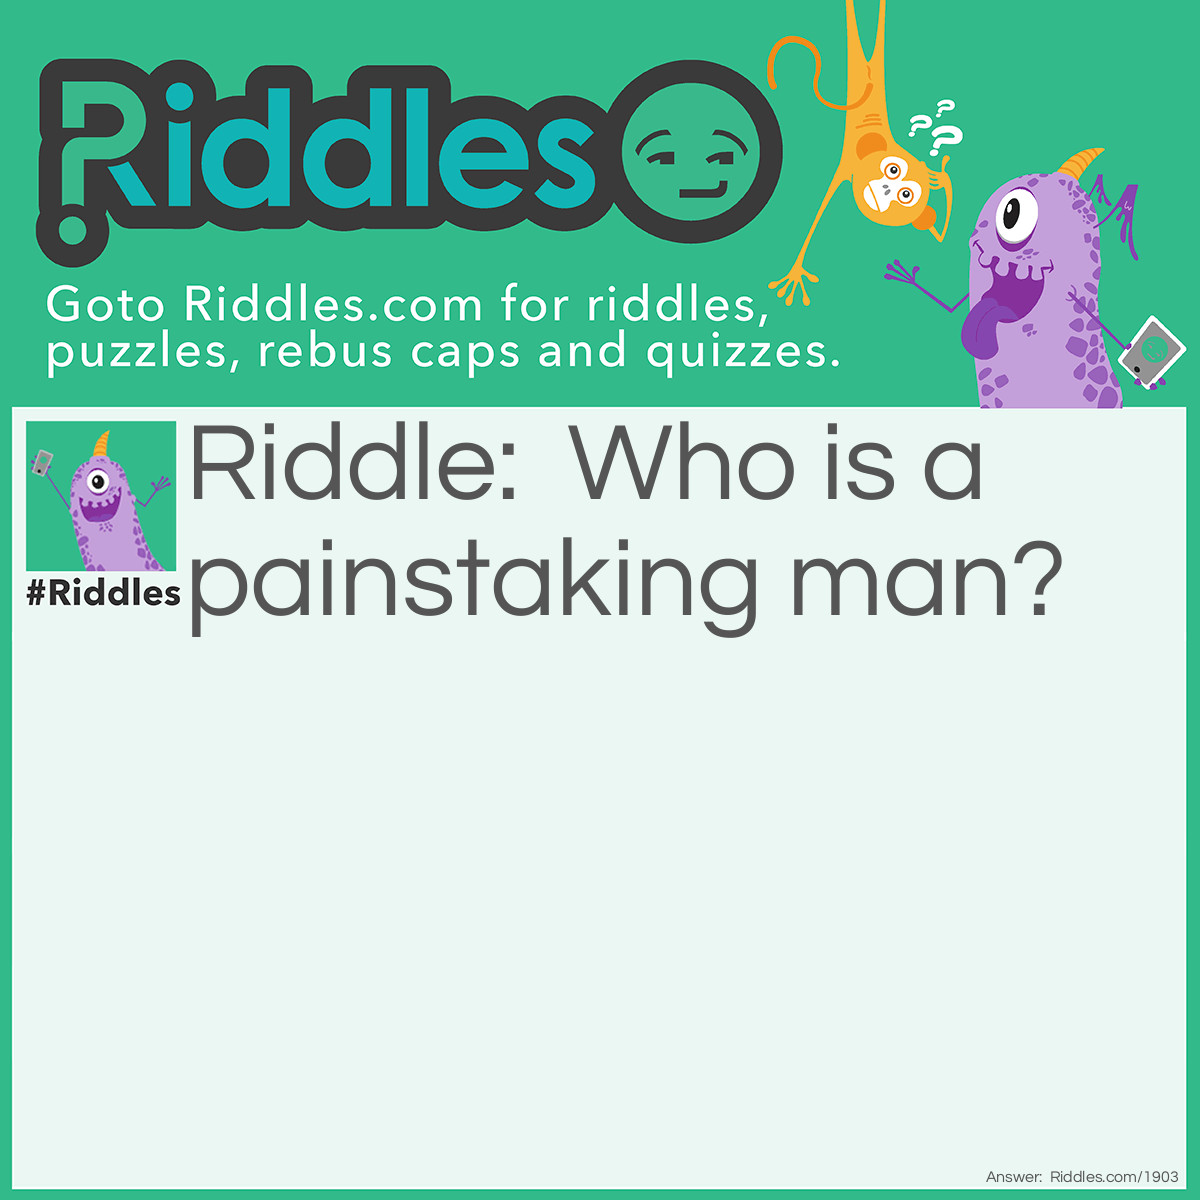 Riddle: Who is a painstaking man? Answer: The dentist.